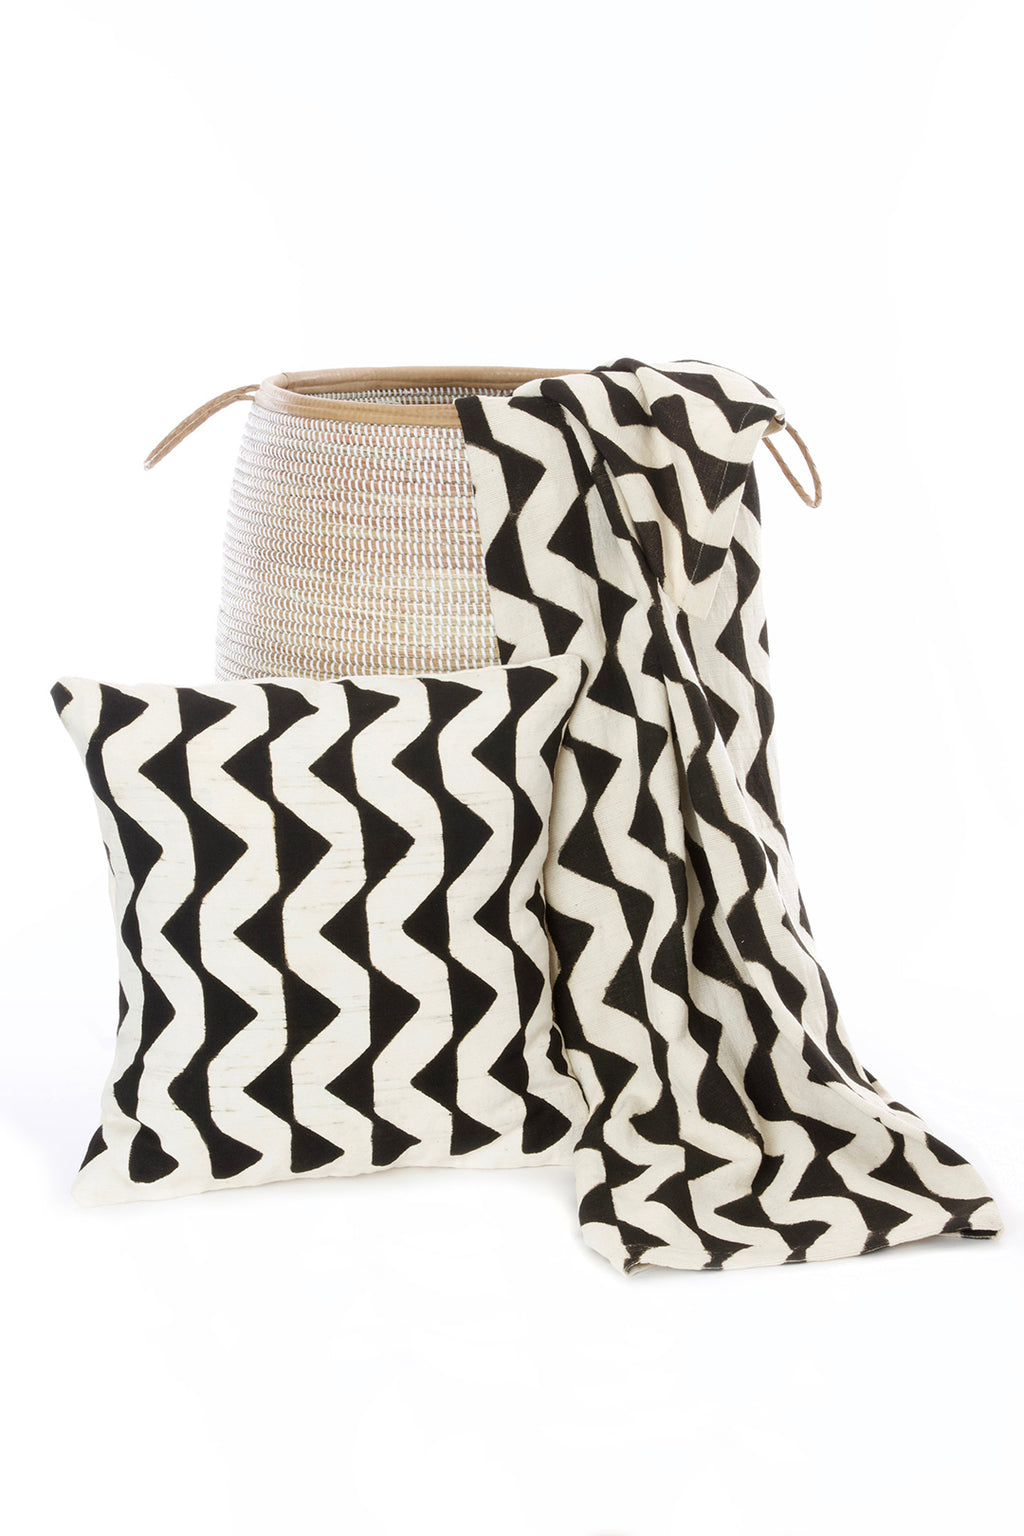 Malian Mudcloth Expedition Organic Cotton Pillow Cover